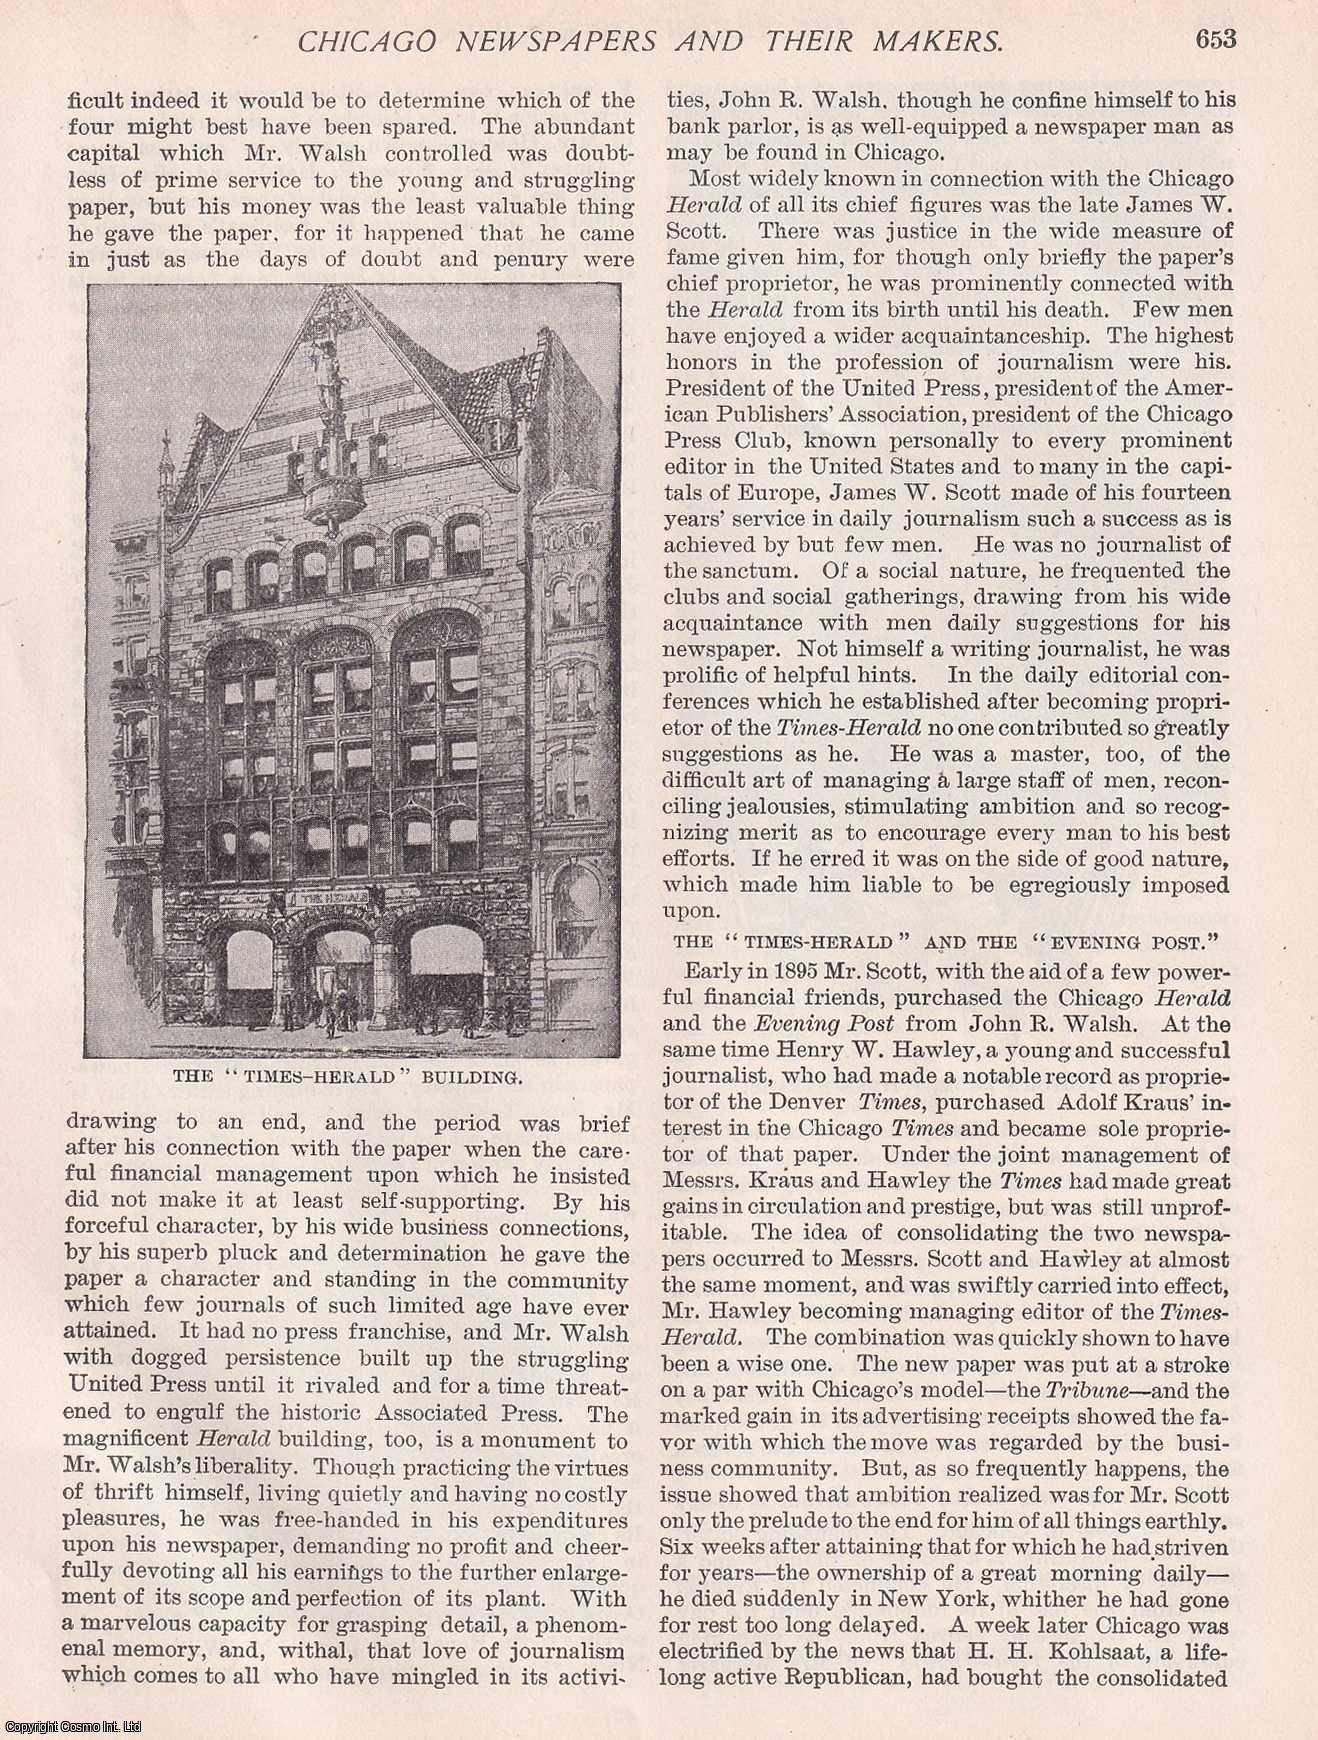 Willis J. Abbot - Chicago Newspapers and their Makers. An original article from the American Review of Reviews, 1895.